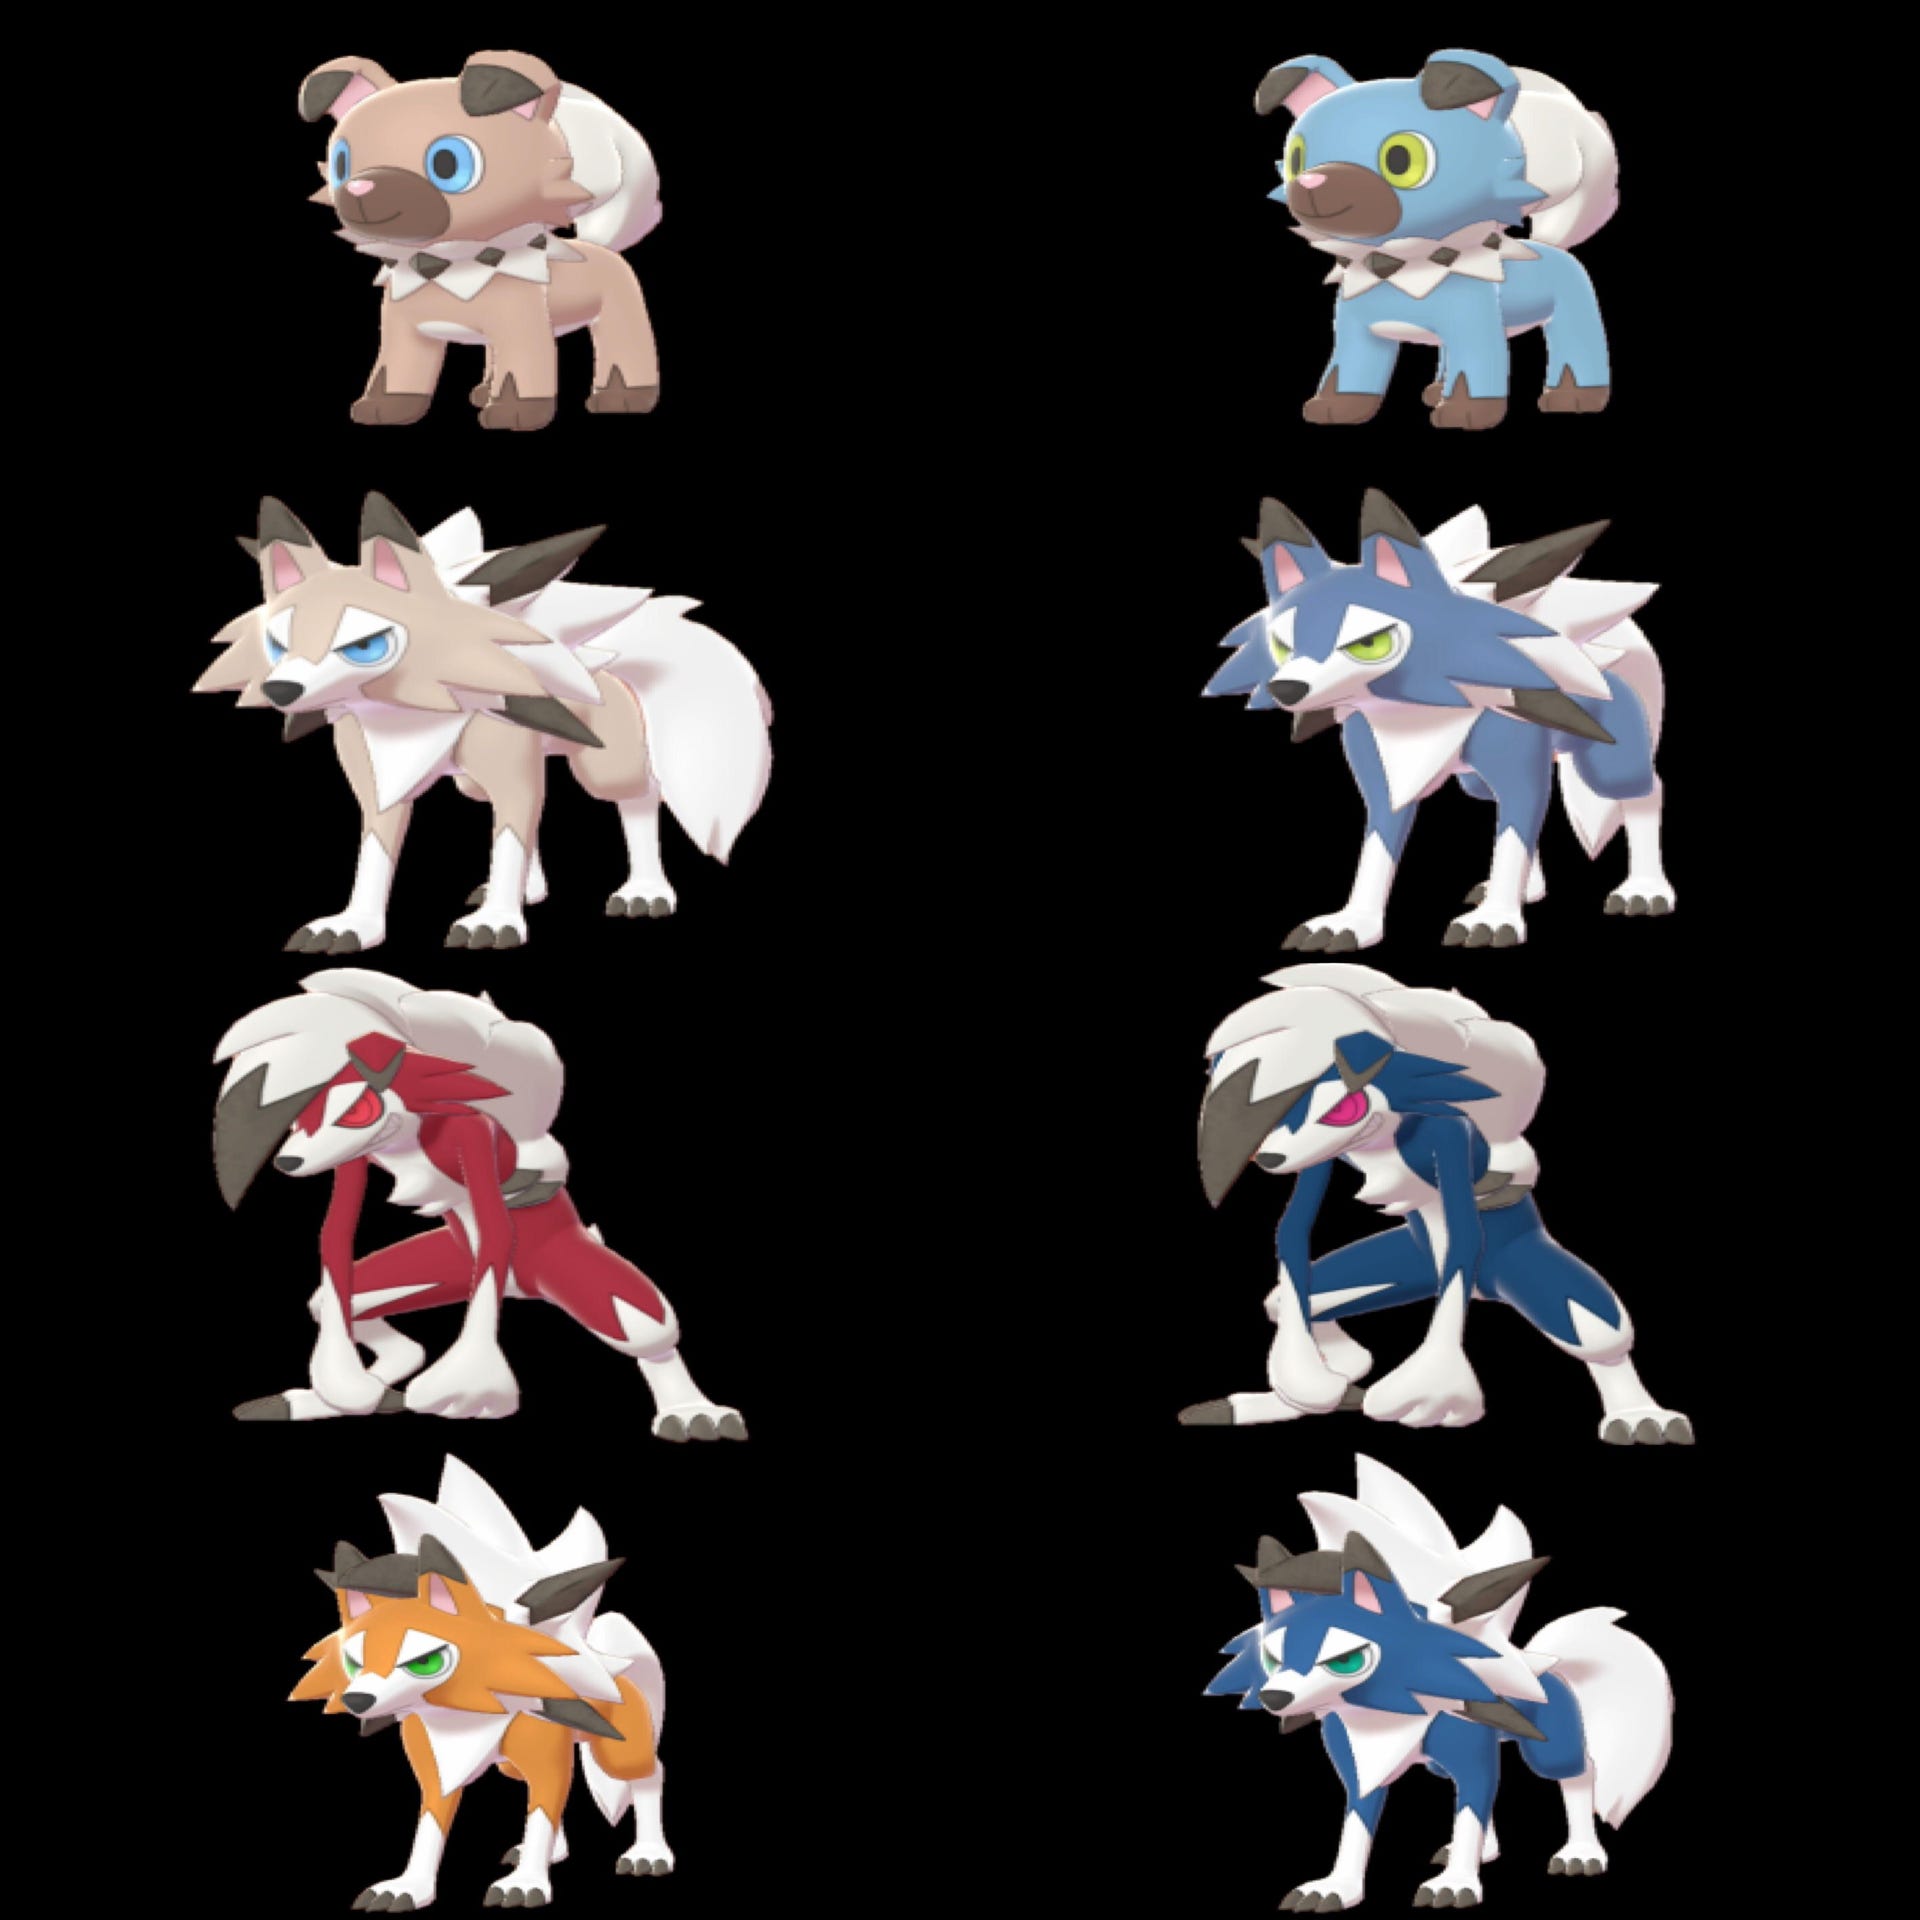 How to get Rockruff and Lycanroc Midday and Midnight forms in Pokémon